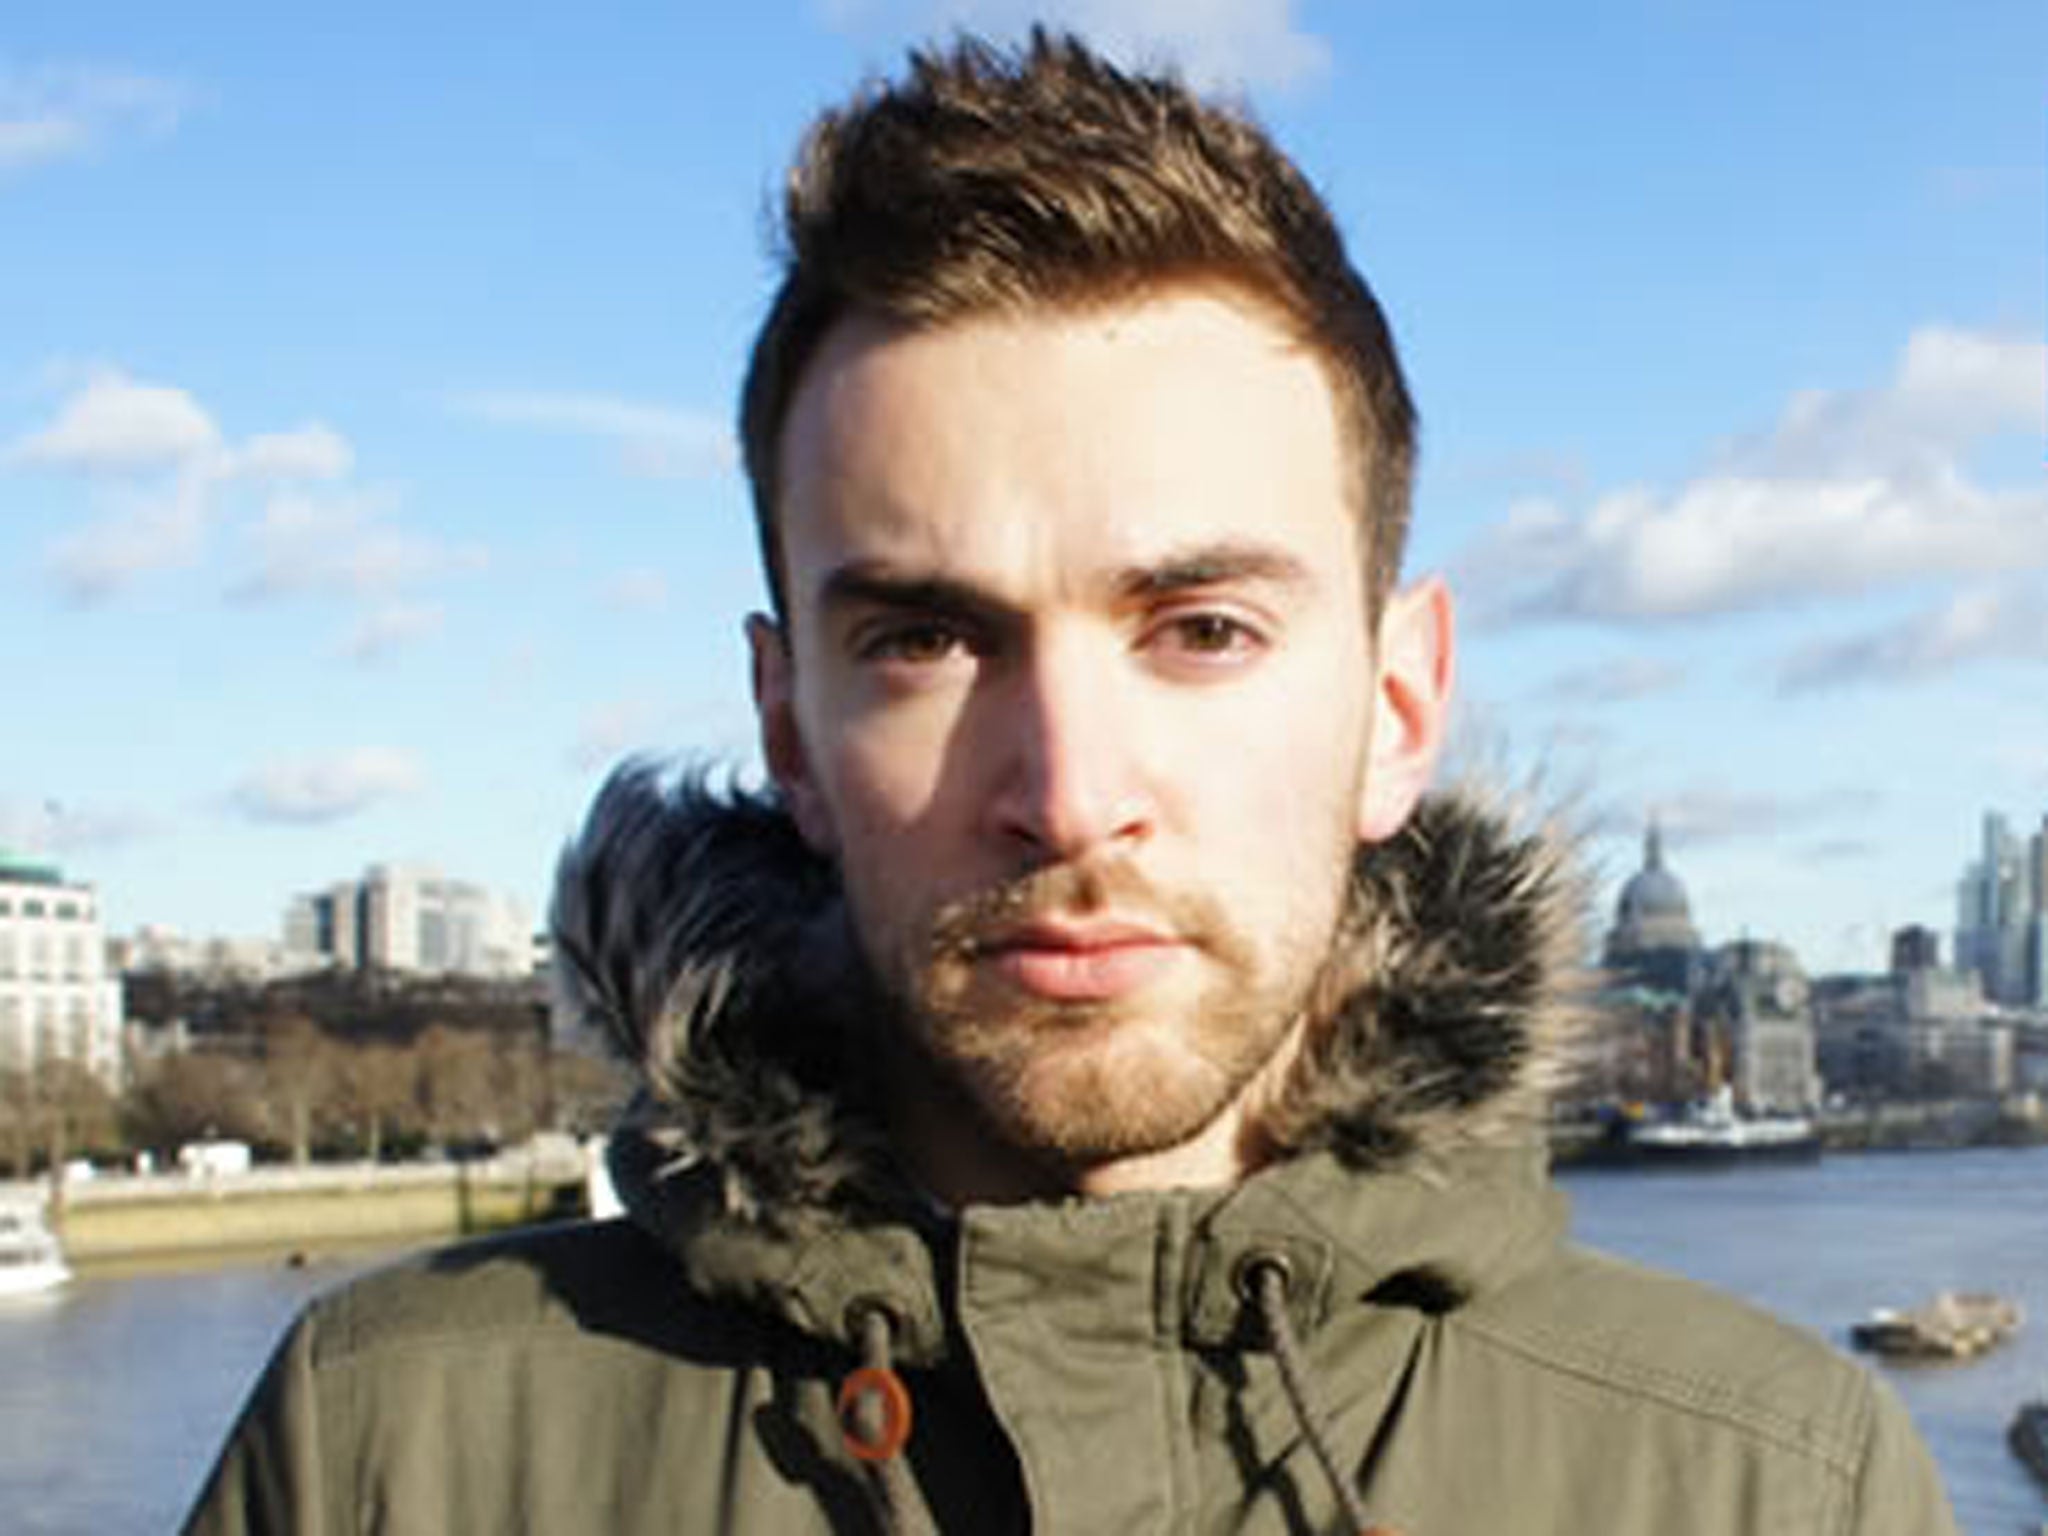 Jonny Benjamin, who launched the 'Finding Mike' campaign to track down the man who saved his life